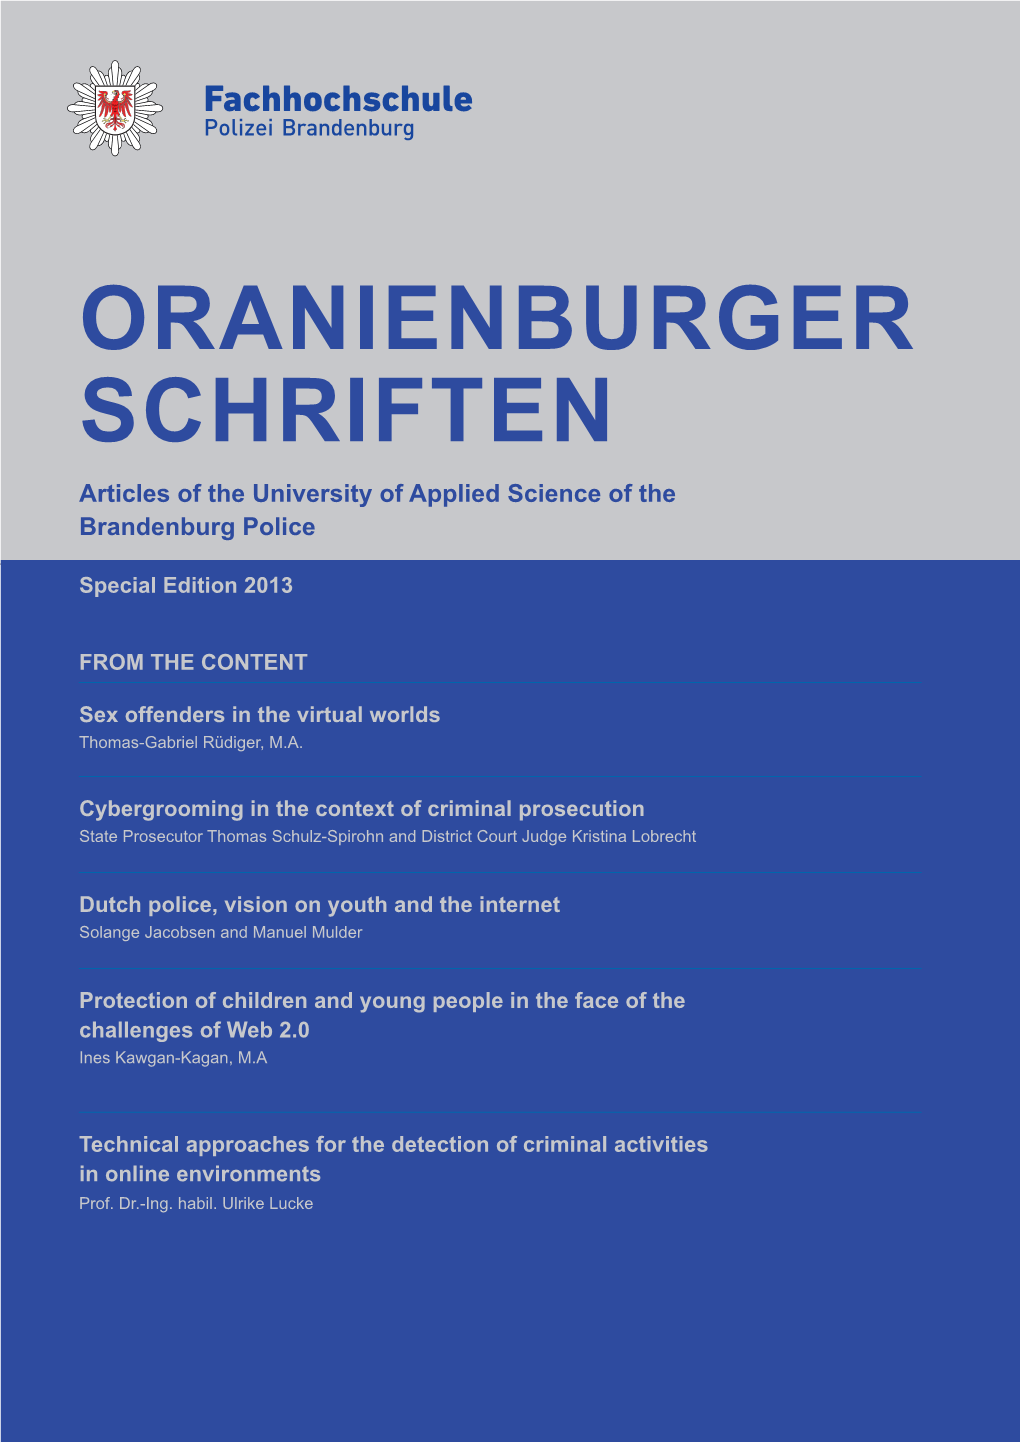 Oranienburger Schriften Articles of the University of Applied Science of the Brandenburg Police